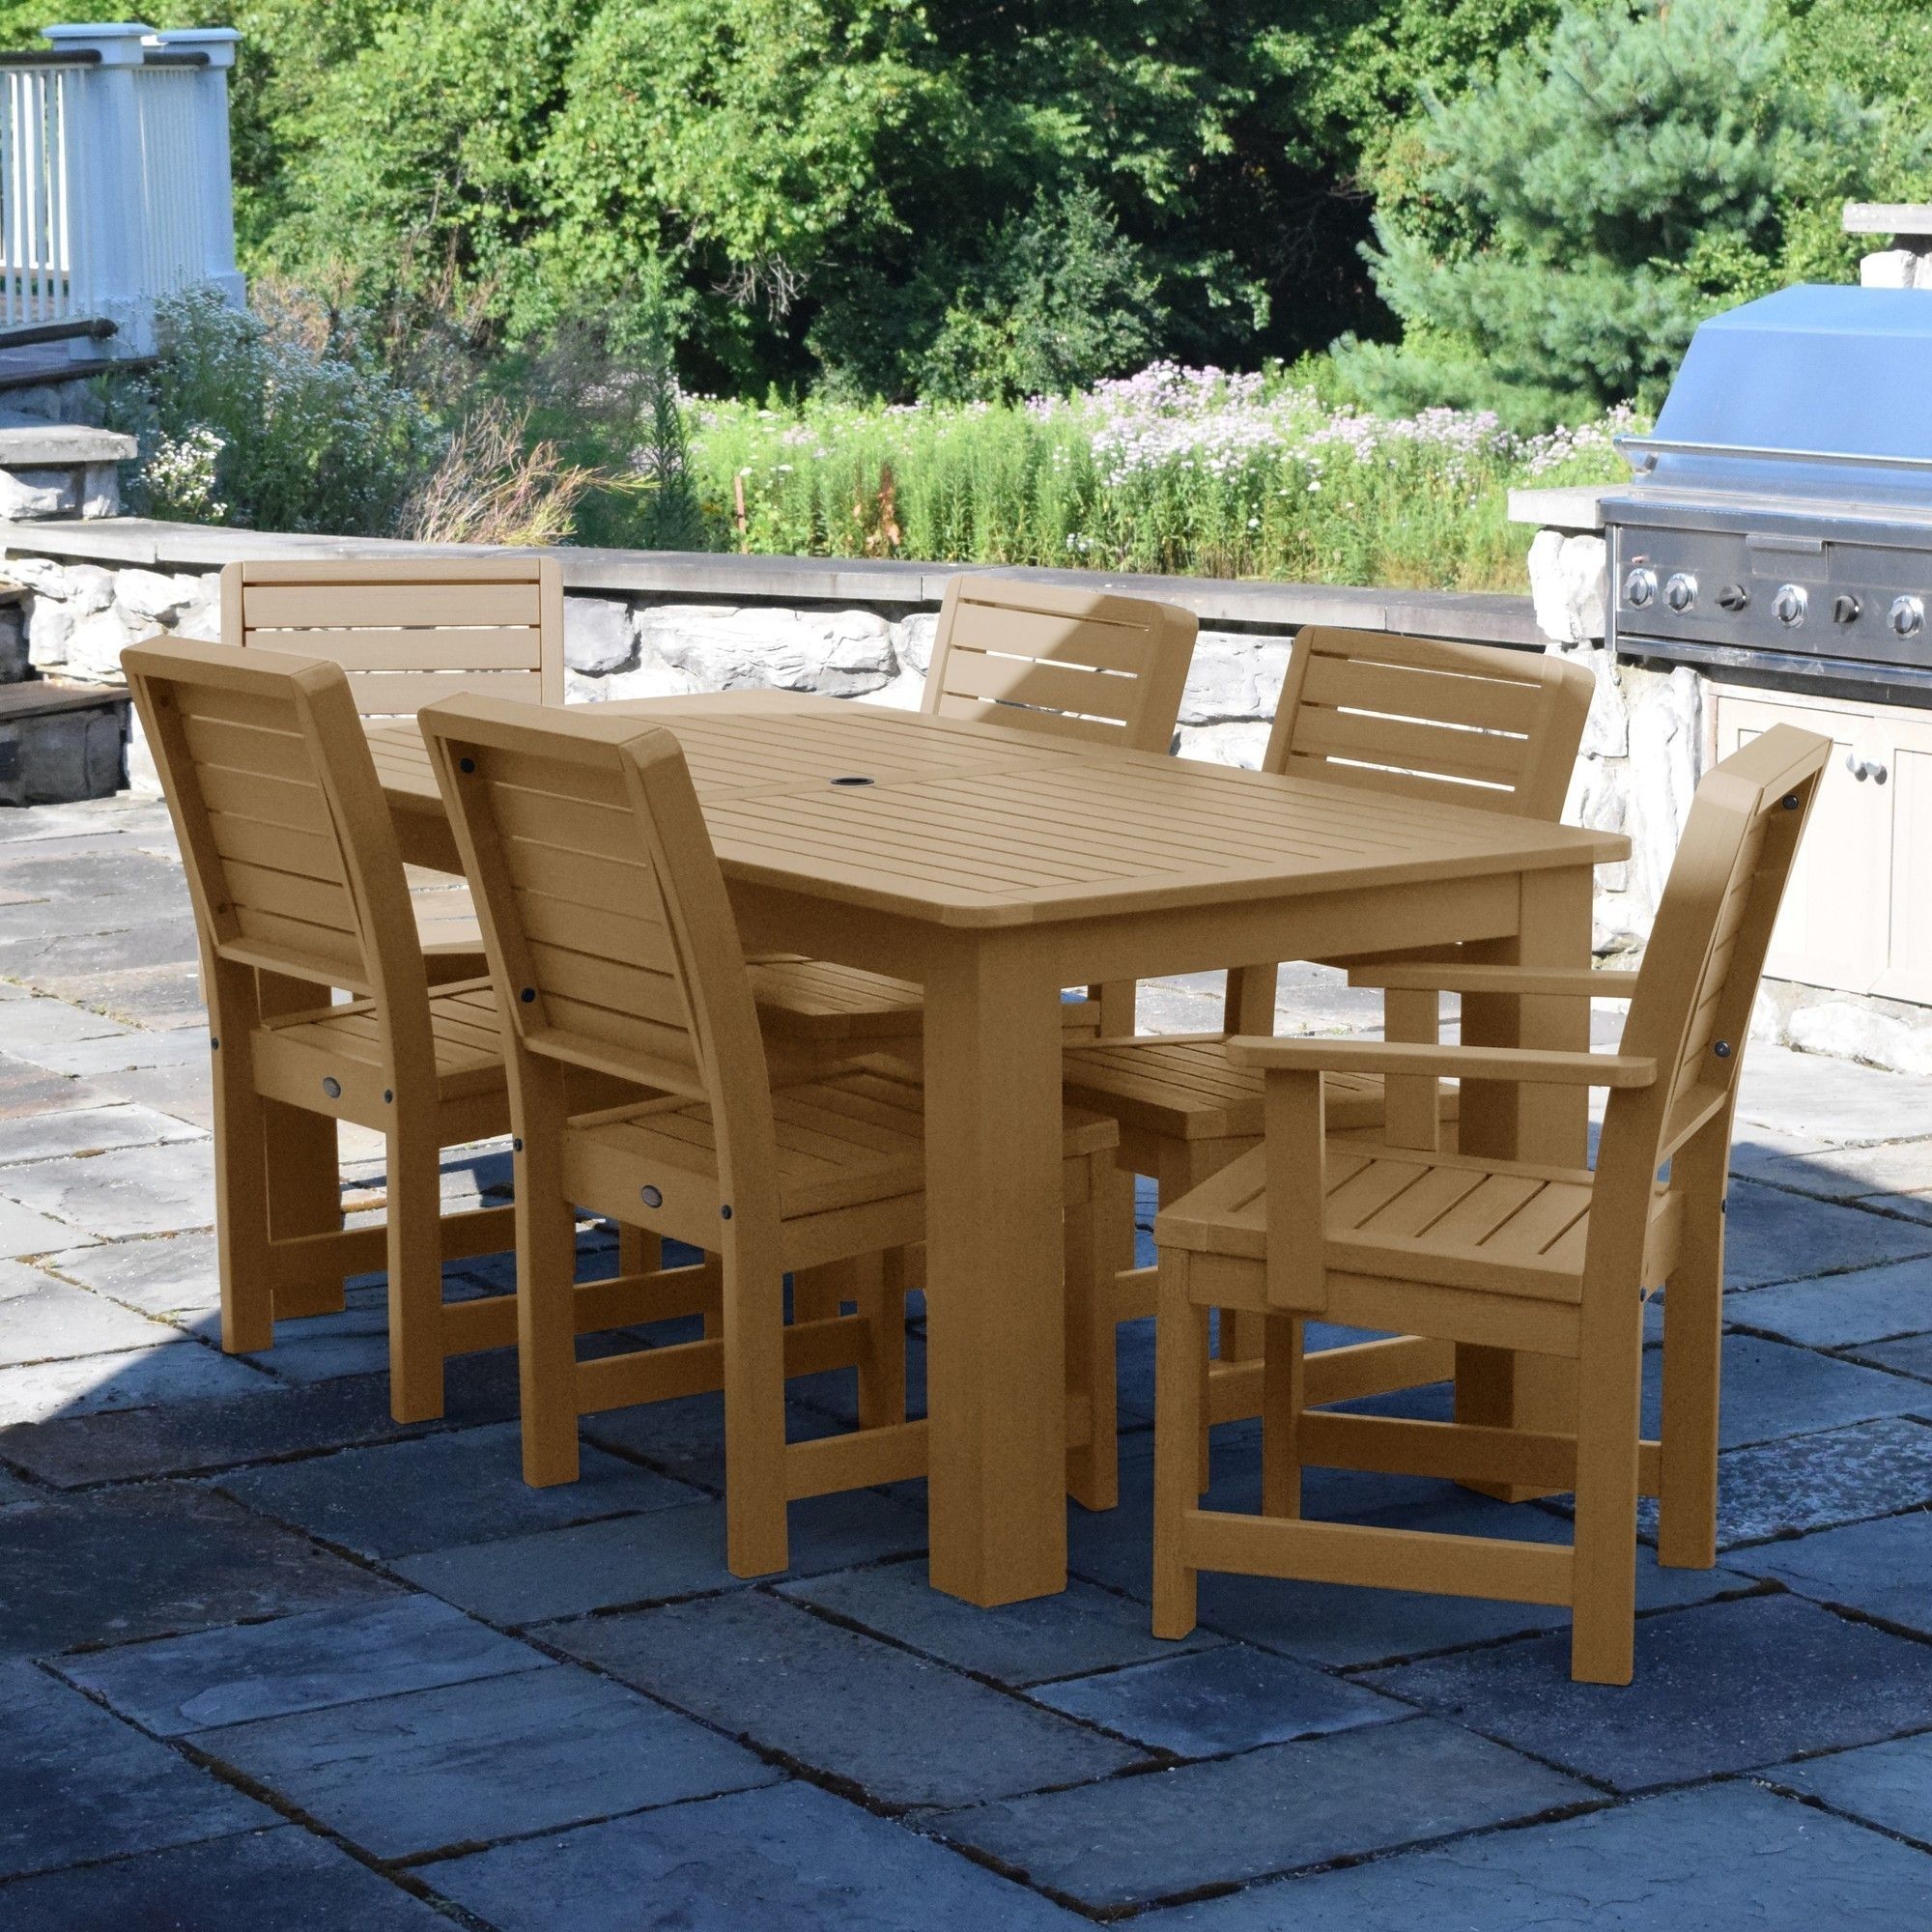 Weatherly 7 Piece Dining Set | Products | Pinterest | Patio Dining With Regard To Latest Chapleau Ii 7 Piece Extension Dining Tables With Side Chairs (View 10 of 20)